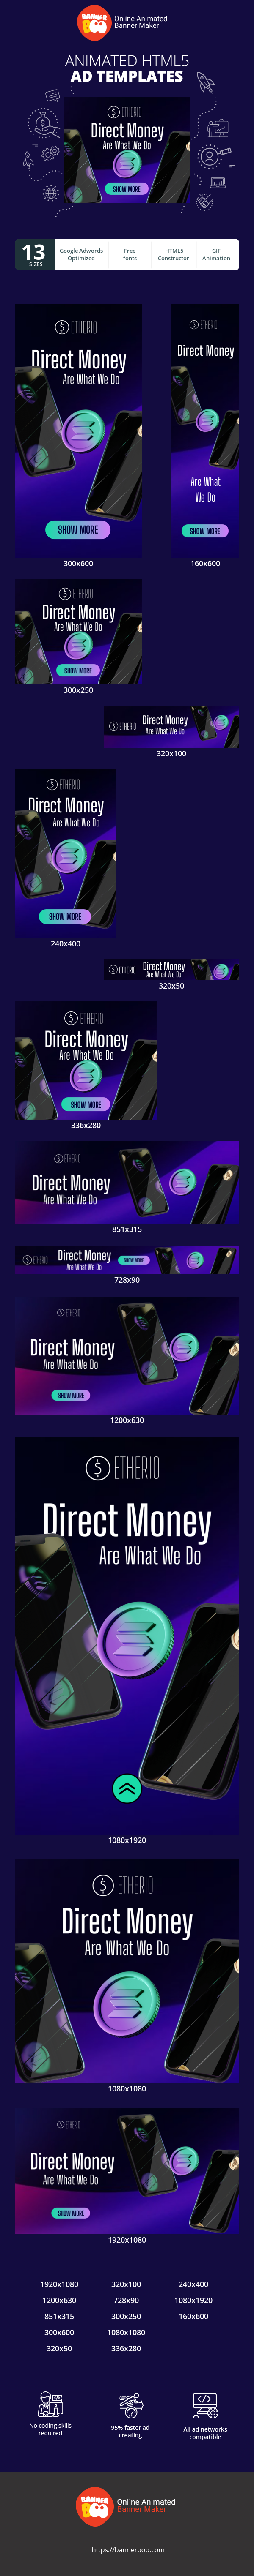 Banner ad template — Direct Money Are What What We Do — Cryptocurrency